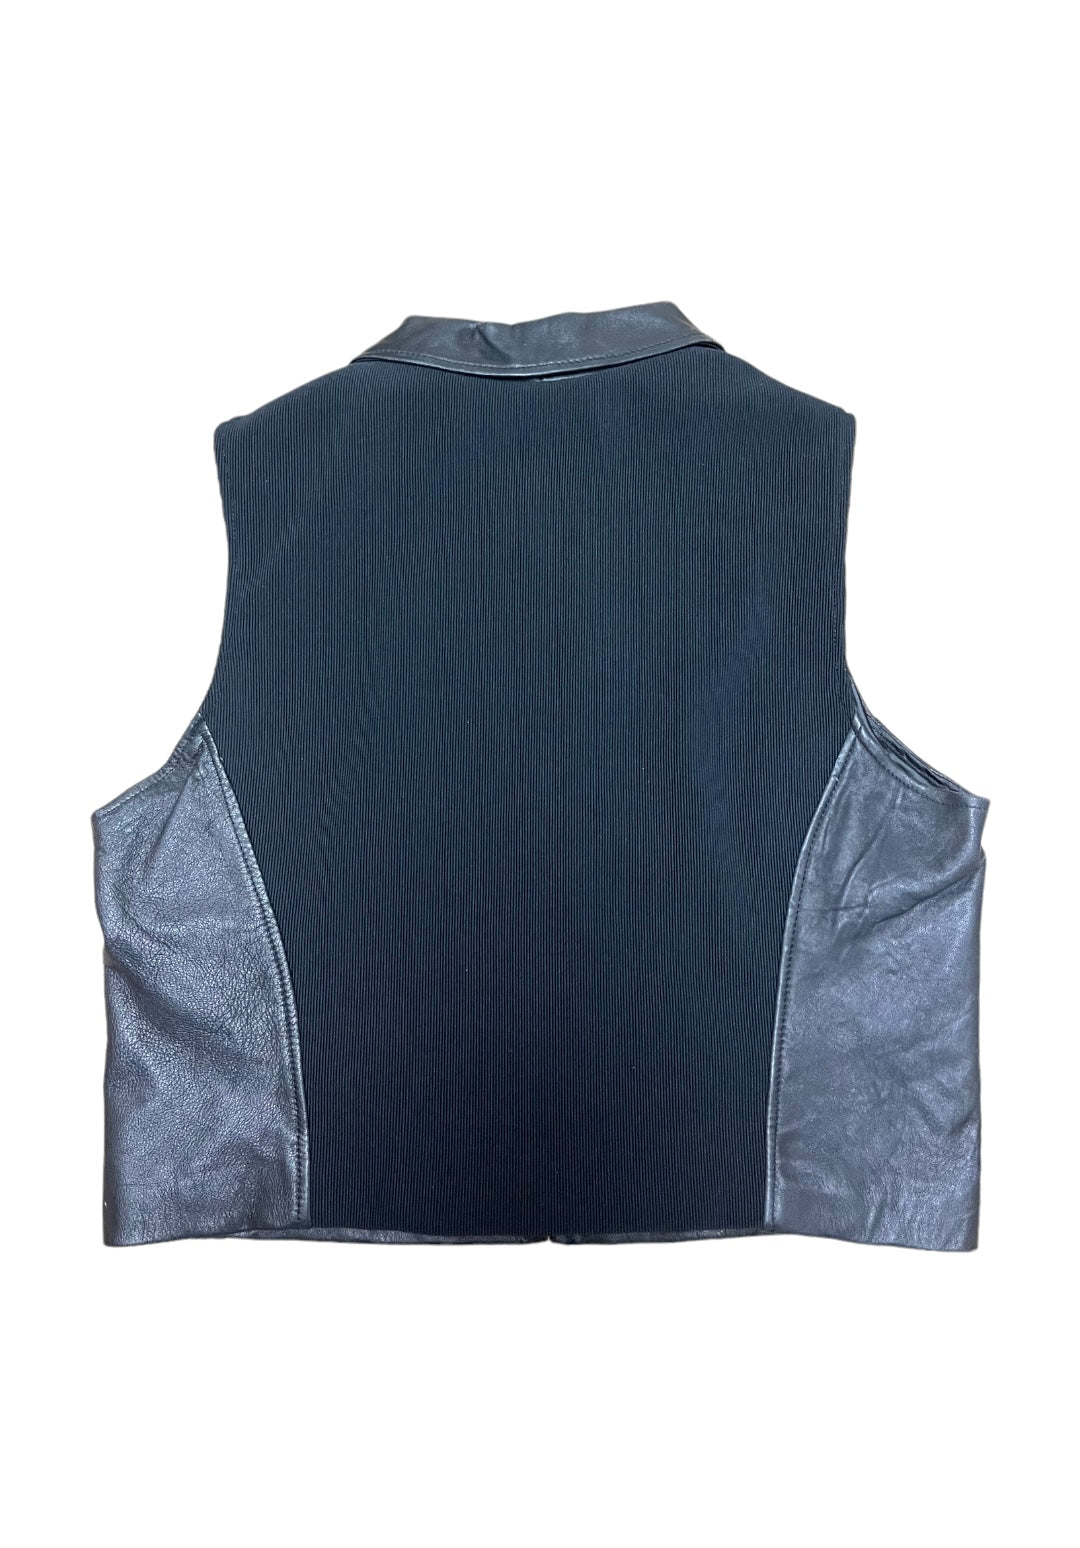 IN-VESTED LEATHER VEST